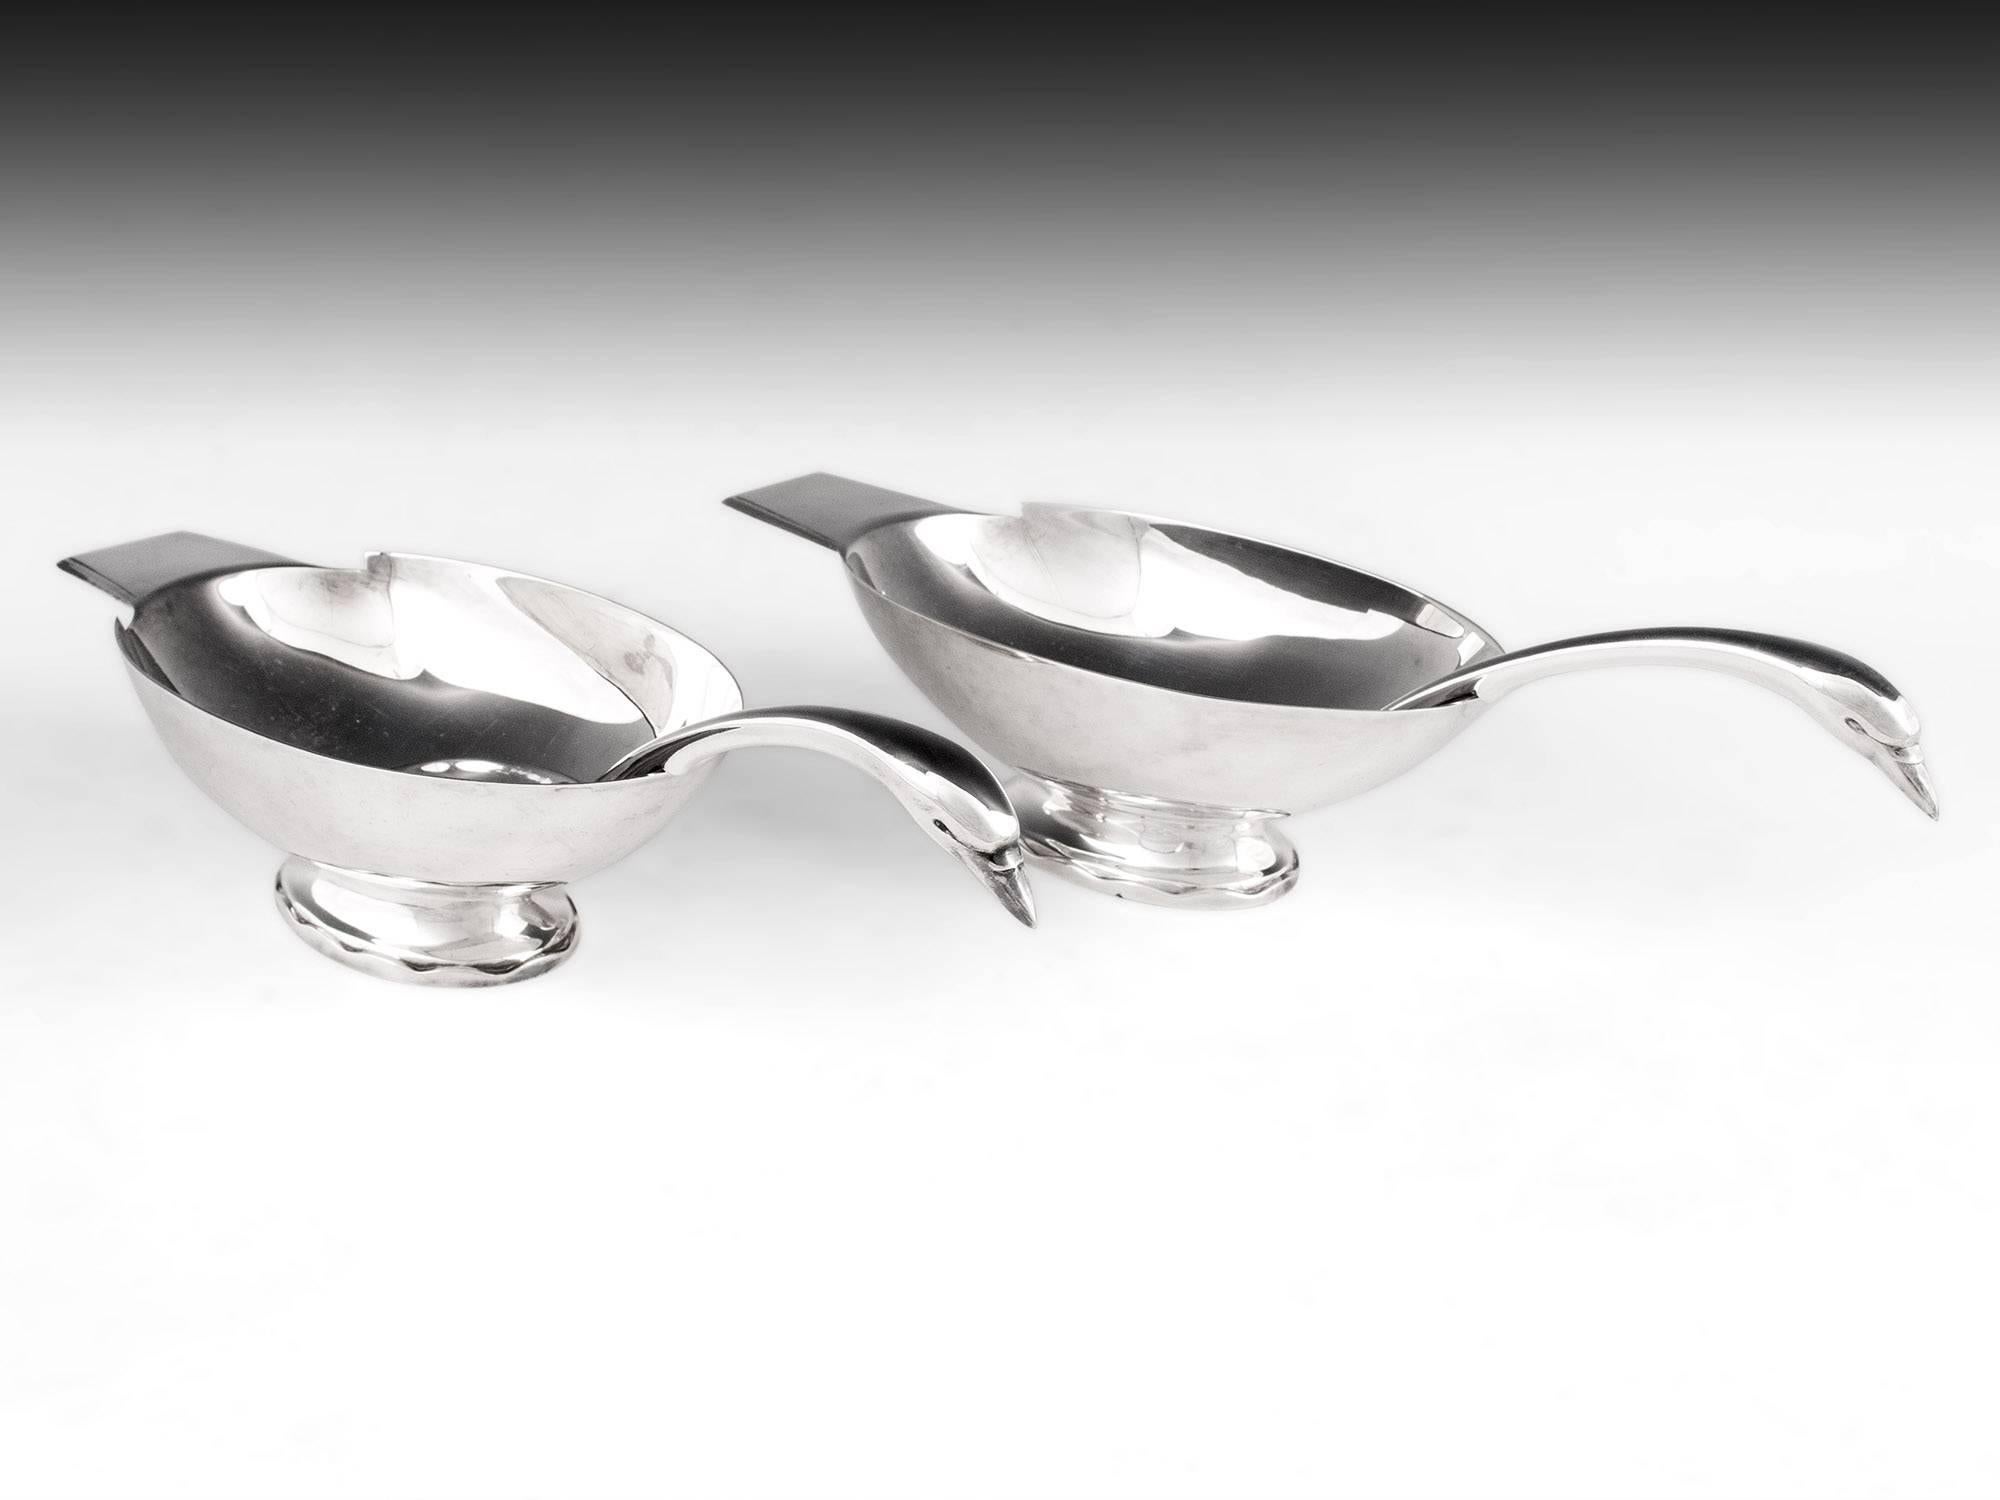 Fabulous pair of Christofle sauce boats designed by Christian Fjerdingstad (1891-1968), a Danish silversmith and design consultant for Christofle, 1924-1939. The oval shaped bowl and fabulous swan neck shaped handle has fantastic balance in the